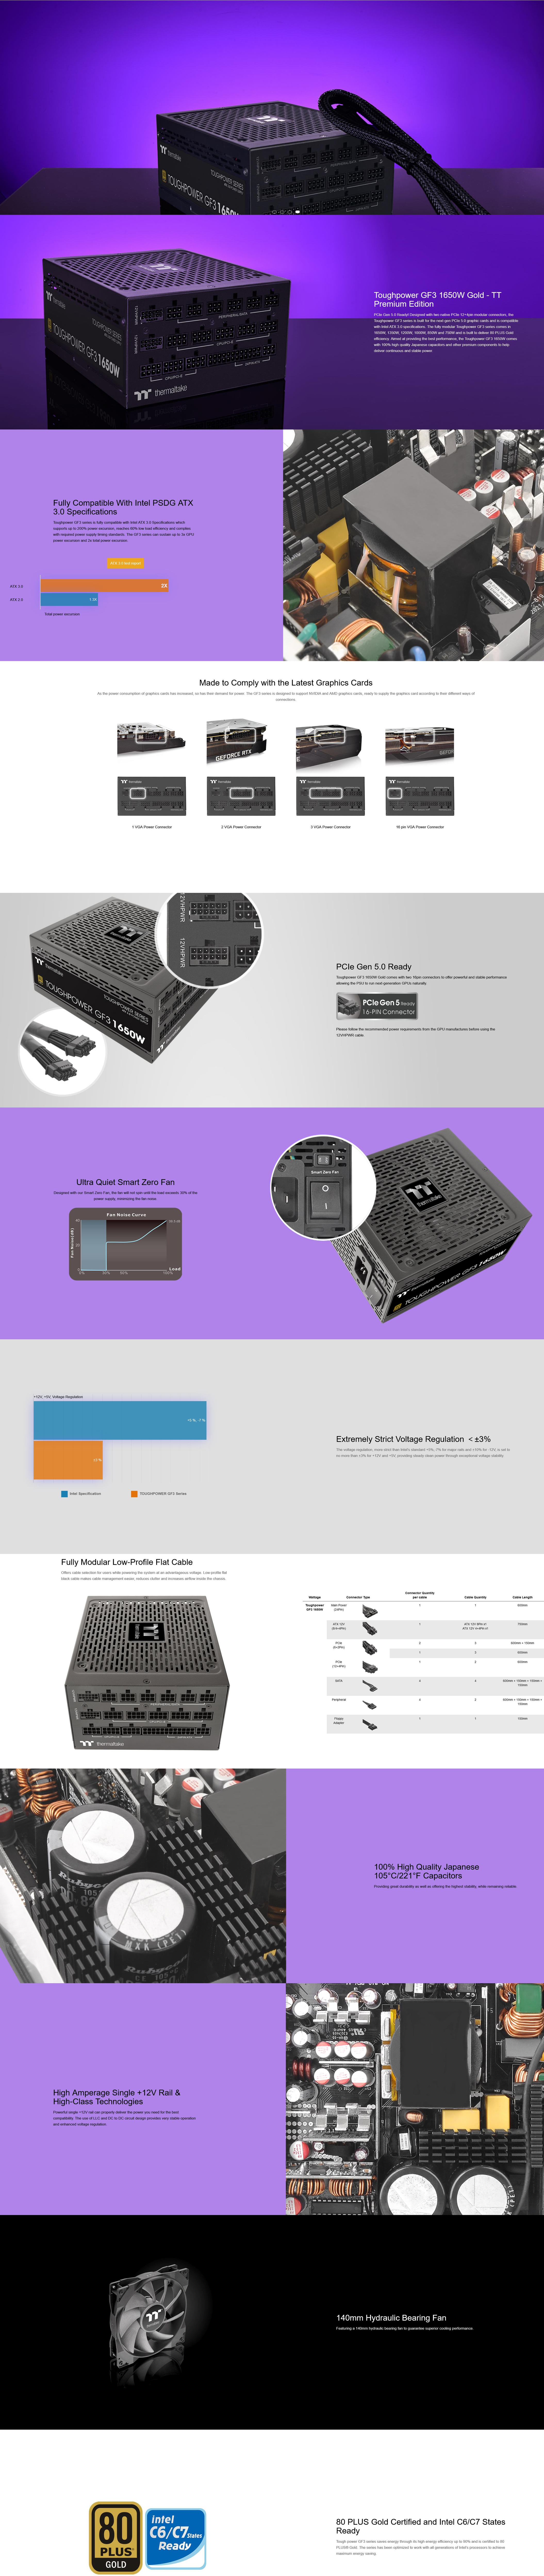 A large marketing image providing additional information about the product Thermaltake Toughpower GF3 - 1650W 80PLUS Gold PCIe 5.0 ATX Modular PSU - Additional alt info not provided